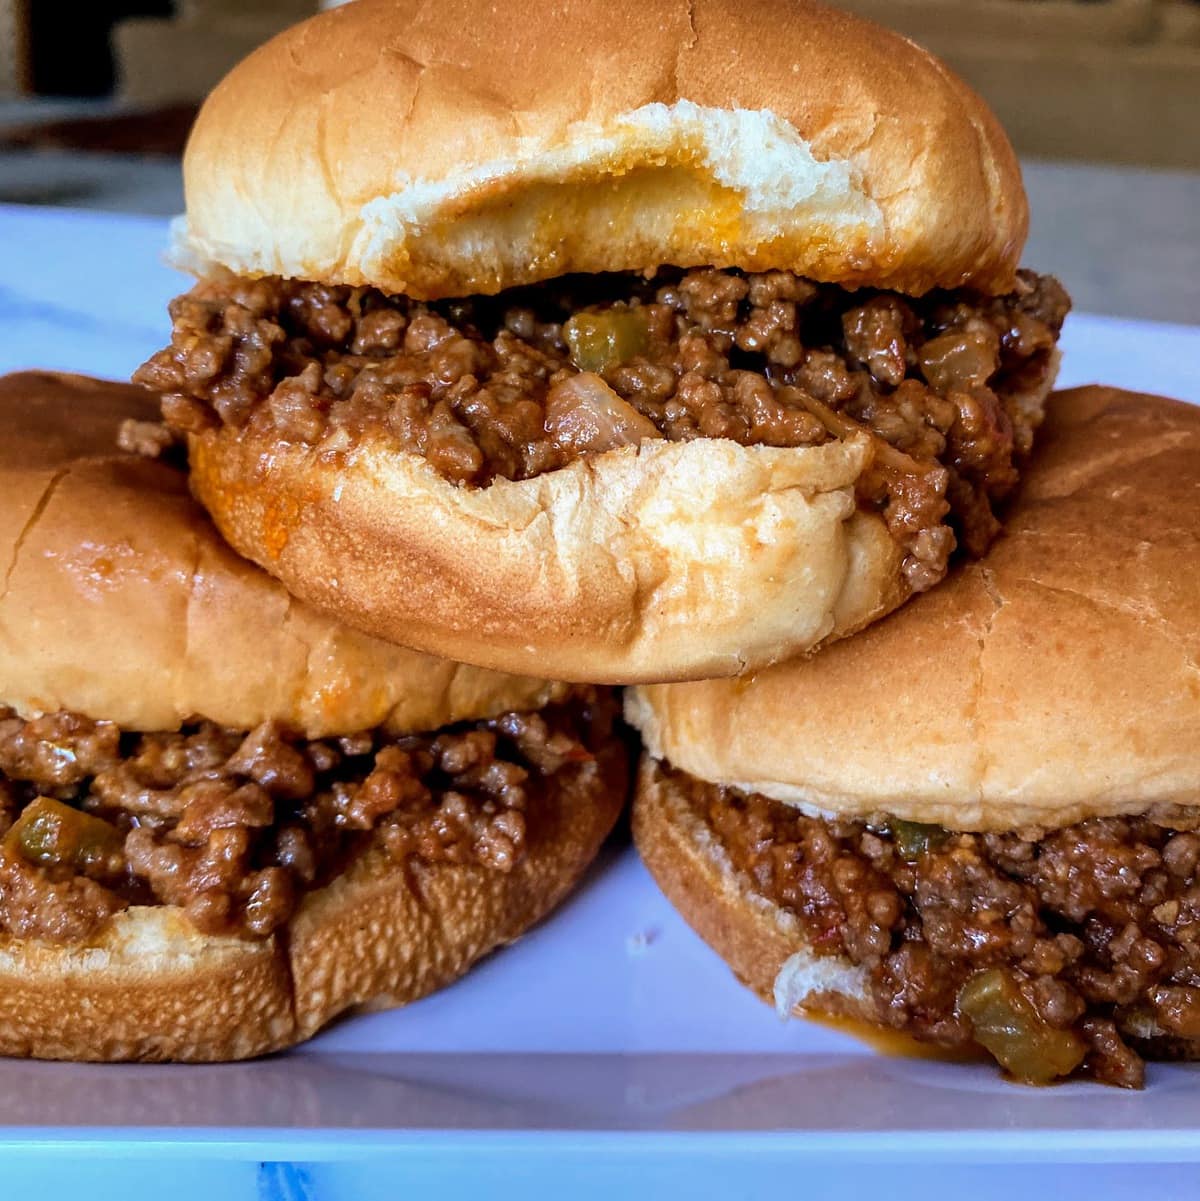 Plate of 6 Sloppy Joe sandwiches, stacked on top of each other